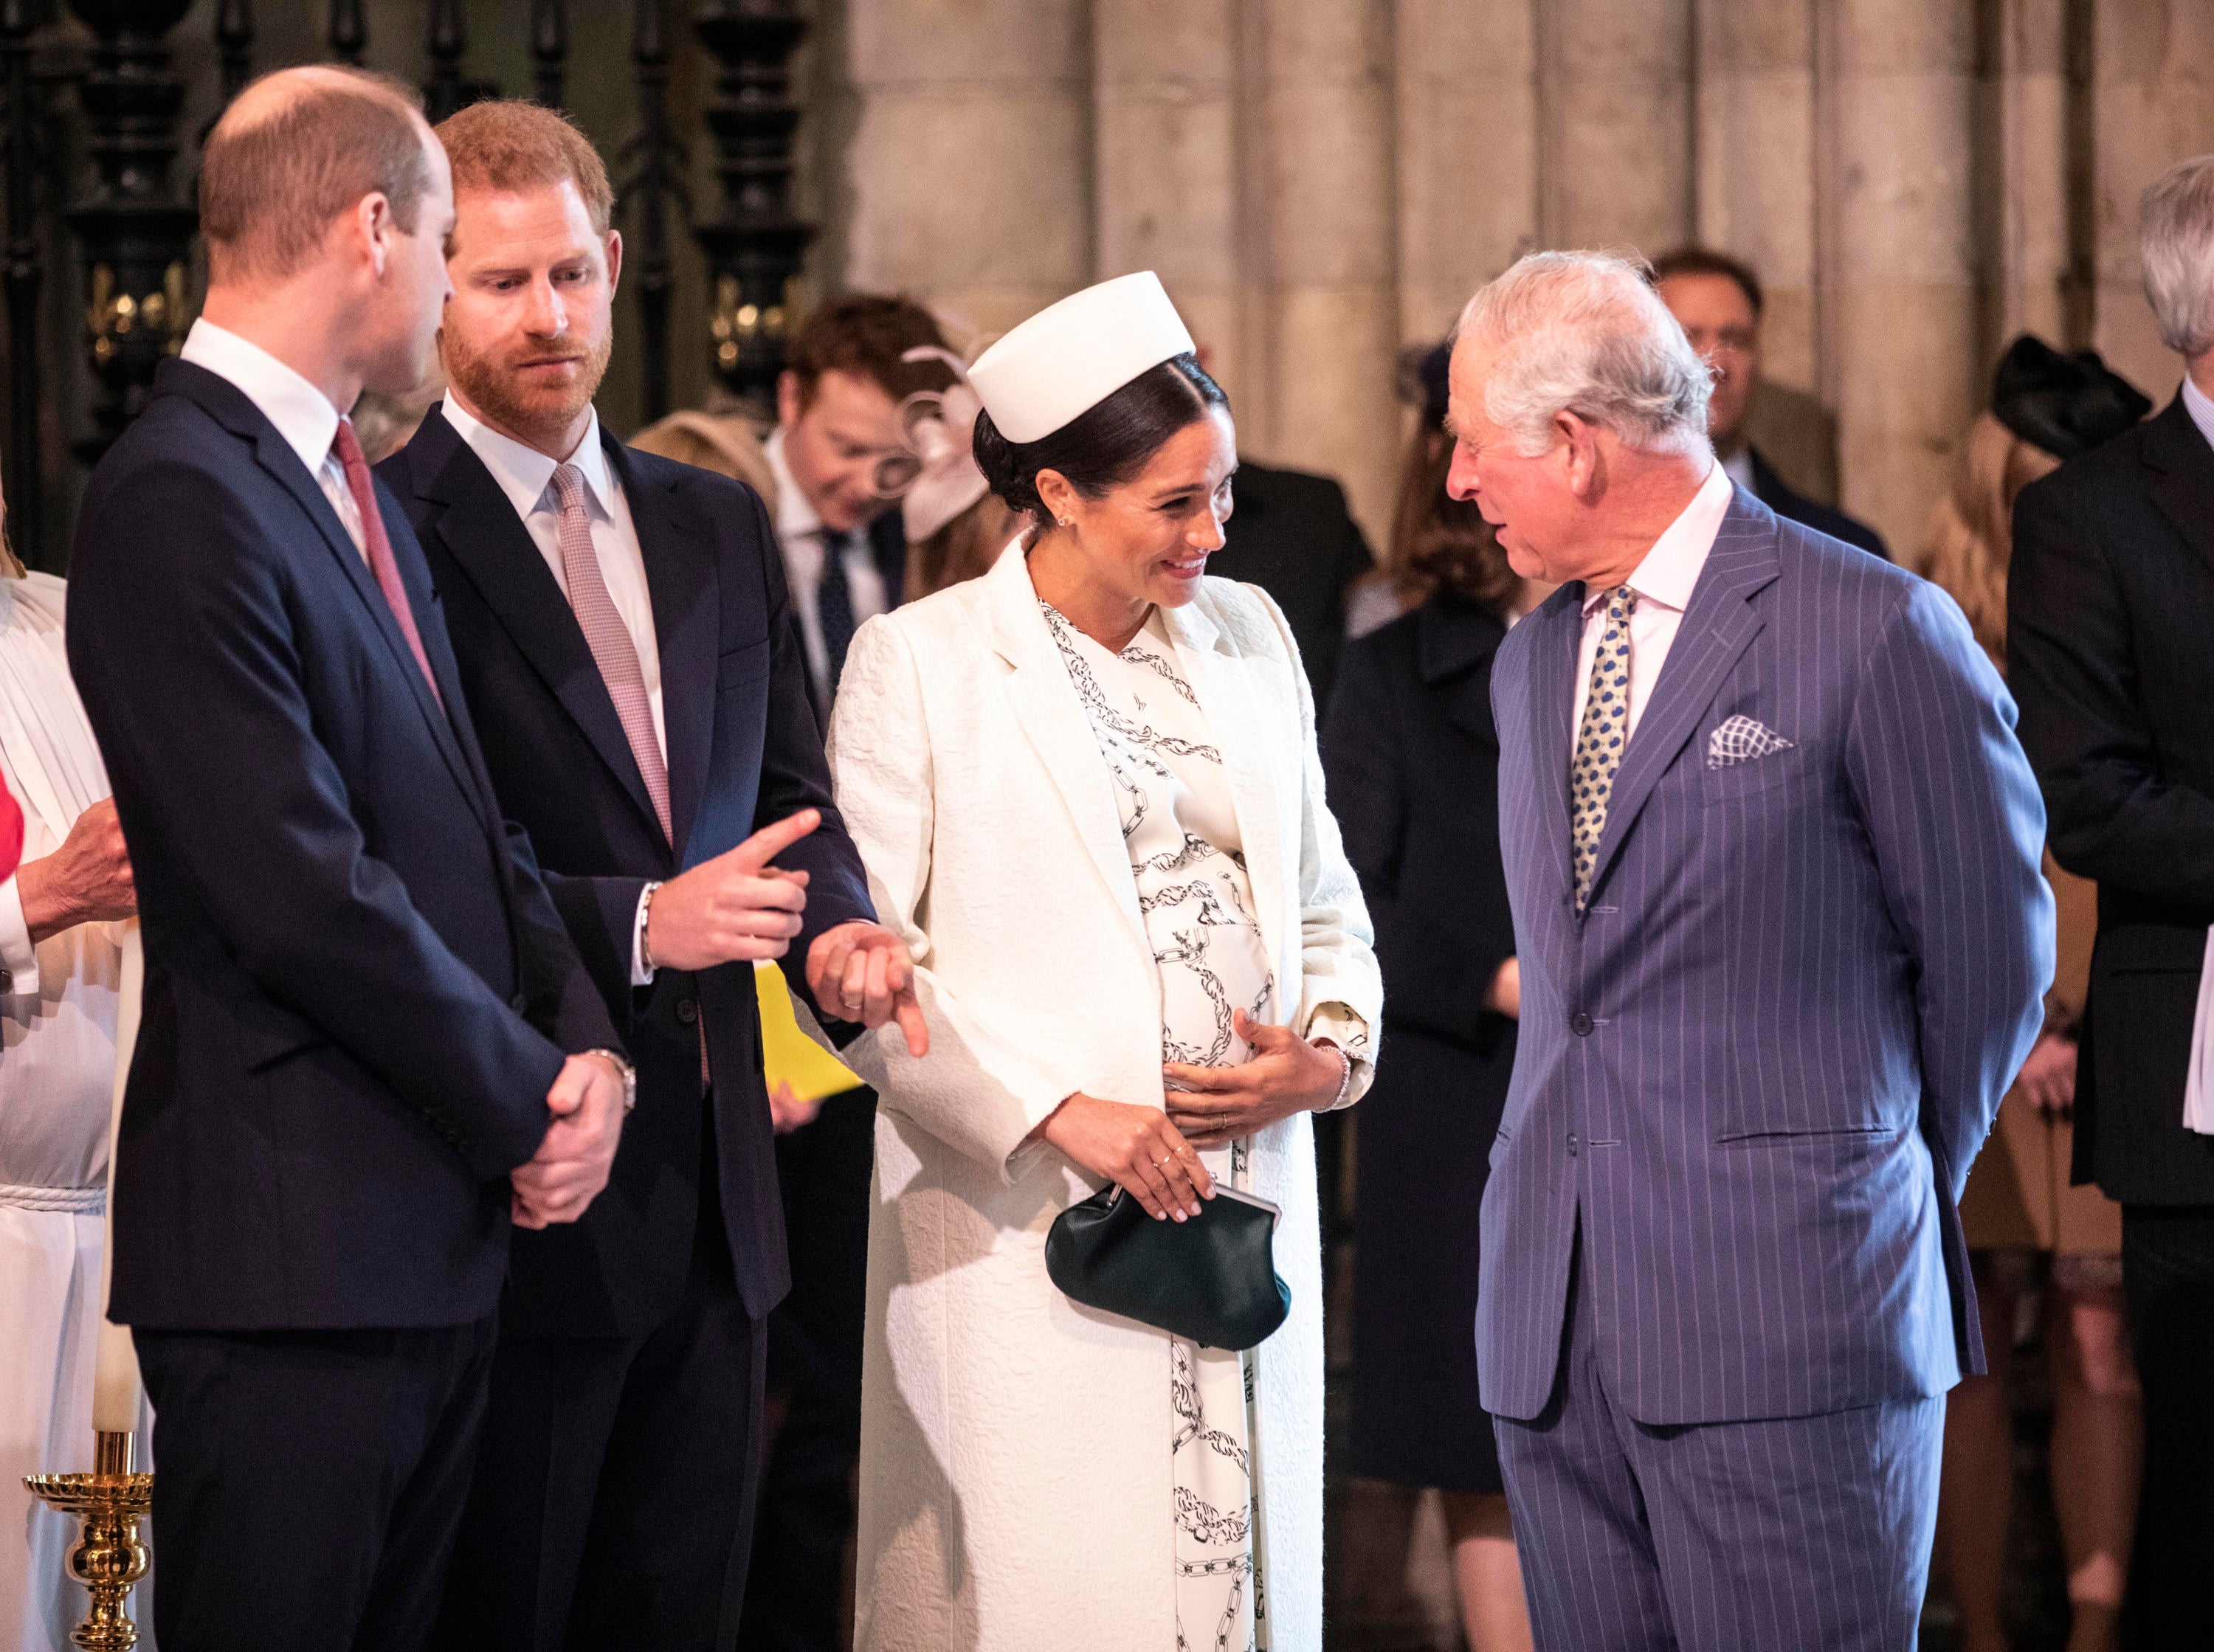 omid scobie, charles, meghan, race row, archie, sussex, king charles was only member of royal family to address meghan racism row, new book claims